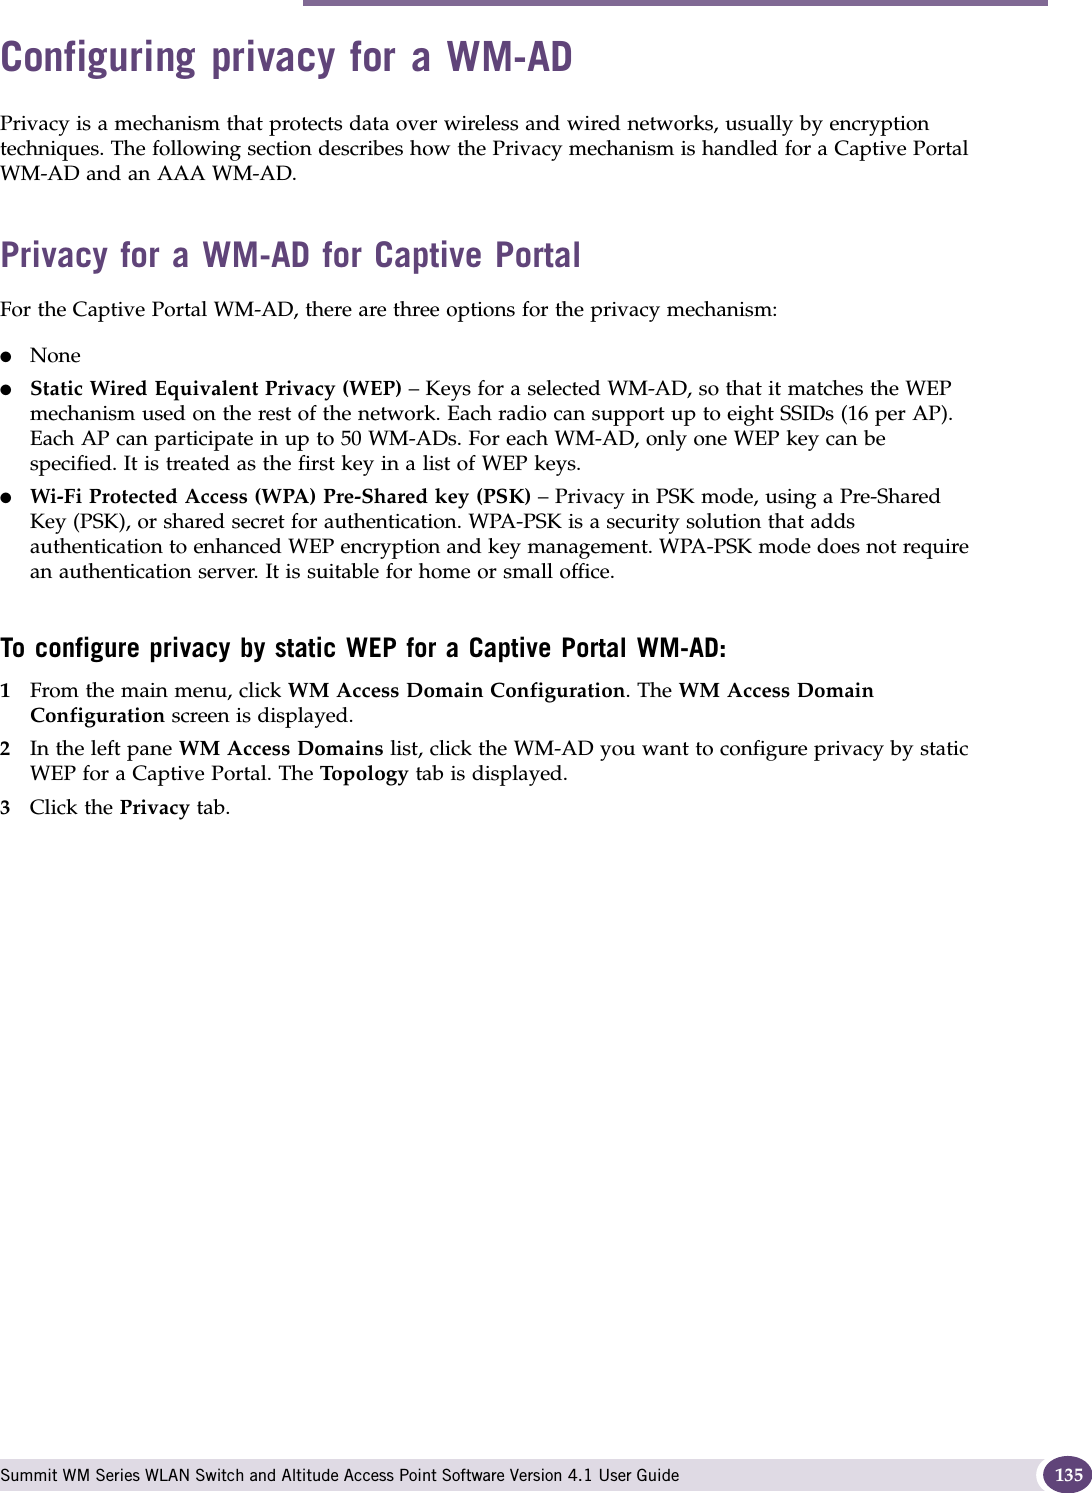 Configuring privacy for a WM-AD Summit WM Series WLAN Switch and Altitude Access Point Software Version 4.1 User Guide 135Configuring privacy for a WM-ADPrivacy is a mechanism that protects data over wireless and wired networks, usually by encryption techniques. The following section describes how the Privacy mechanism is handled for a Captive Portal WM-AD and an AAA WM-AD. Privacy for a WM-AD for Captive PortalFor the Captive Portal WM-AD, there are three options for the privacy mechanism:●None●Static Wired Equivalent Privacy (WEP) – Keys for a selected WM-AD, so that it matches the WEP mechanism used on the rest of the network. Each radio can support up to eight SSIDs (16 per AP). Each AP can participate in up to 50 WM-ADs. For each WM-AD, only one WEP key can be specified. It is treated as the first key in a list of WEP keys.●Wi-Fi Protected Access (WPA) Pre-Shared key (PSK) – Privacy in PSK mode, using a Pre-Shared Key (PSK), or shared secret for authentication. WPA-PSK is a security solution that adds authentication to enhanced WEP encryption and key management. WPA-PSK mode does not require an authentication server. It is suitable for home or small office. To configure privacy by static WEP for a Captive Portal WM-AD:1From the main menu, click WM Access Domain Configuration. The WM Access Domain Configuration screen is displayed.2In the left pane WM Access Domains list, click the WM-AD you want to configure privacy by static WEP for a Captive Portal. The Top ol og y tab is displayed.3Click the Privacy tab.